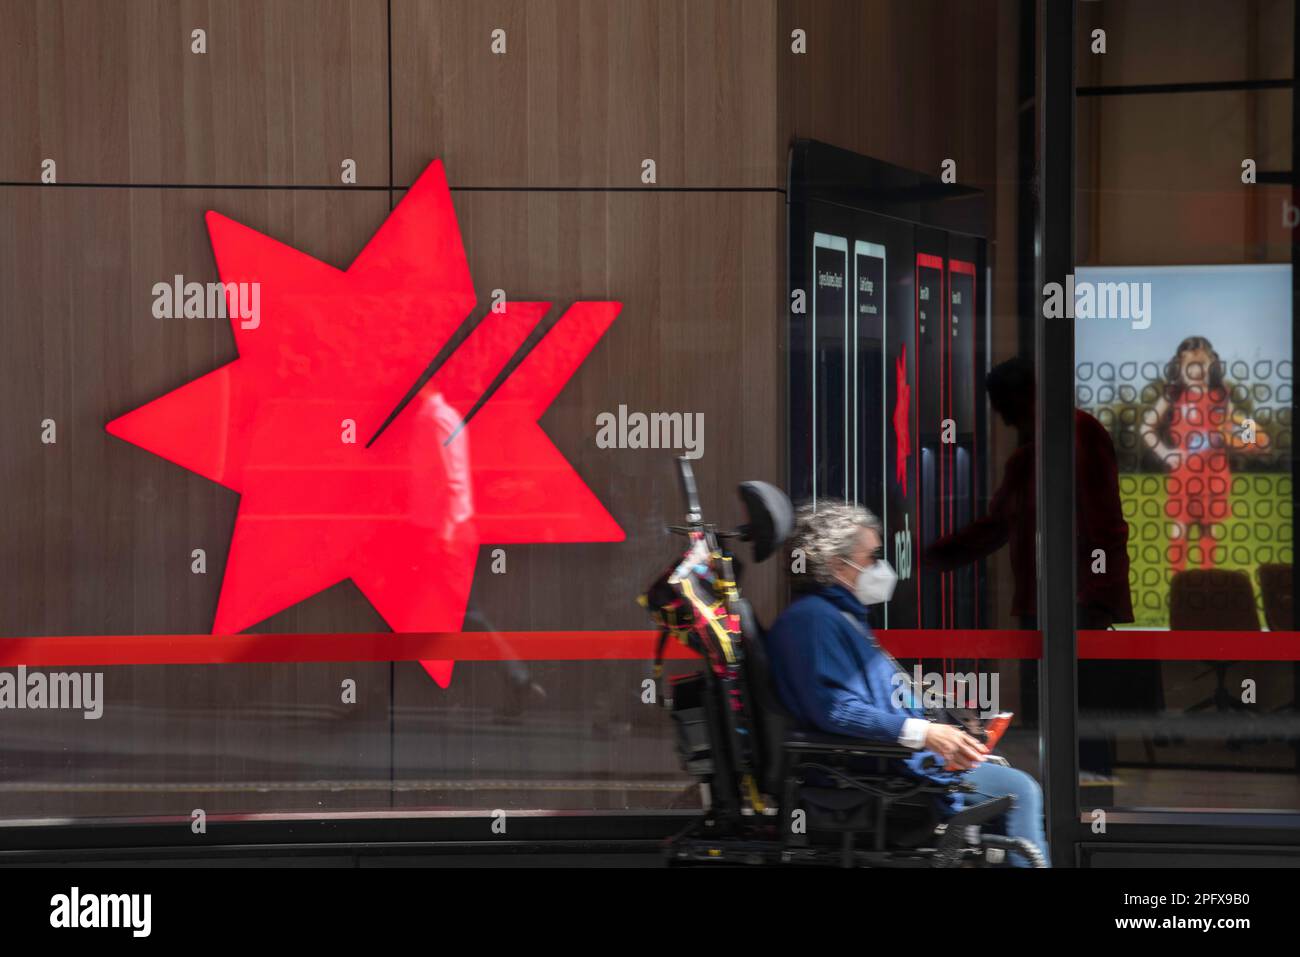 A woman in a motorised wheelchair moves past a National Australia Bank (Nab bank) logo sign on the interior of a building in Sydney, NSW, Australia Stock Photo